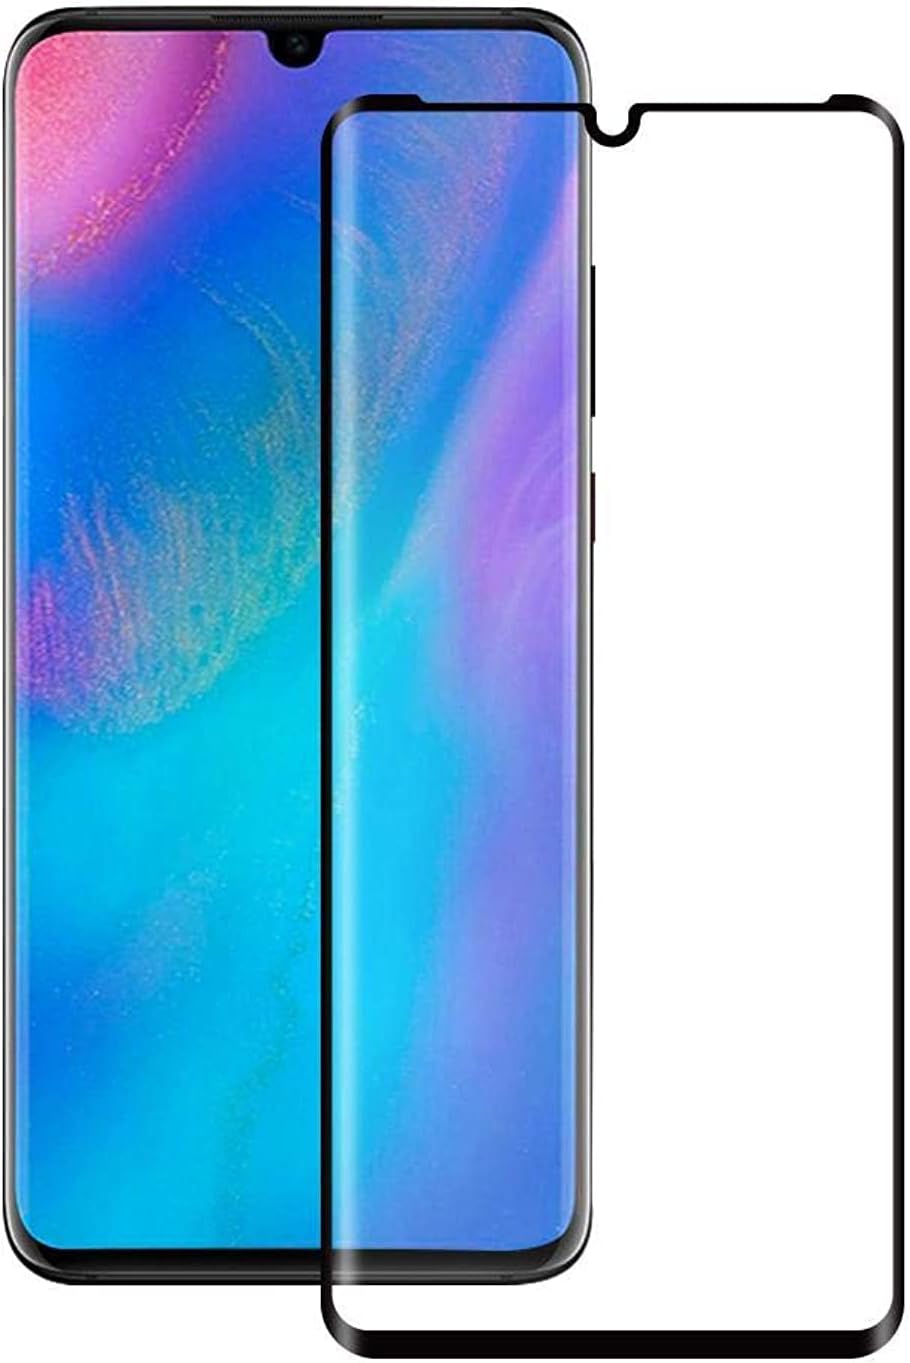 Tempered Glass Screen Protector for Huawei P30 Pro - Transparent with Black Frame